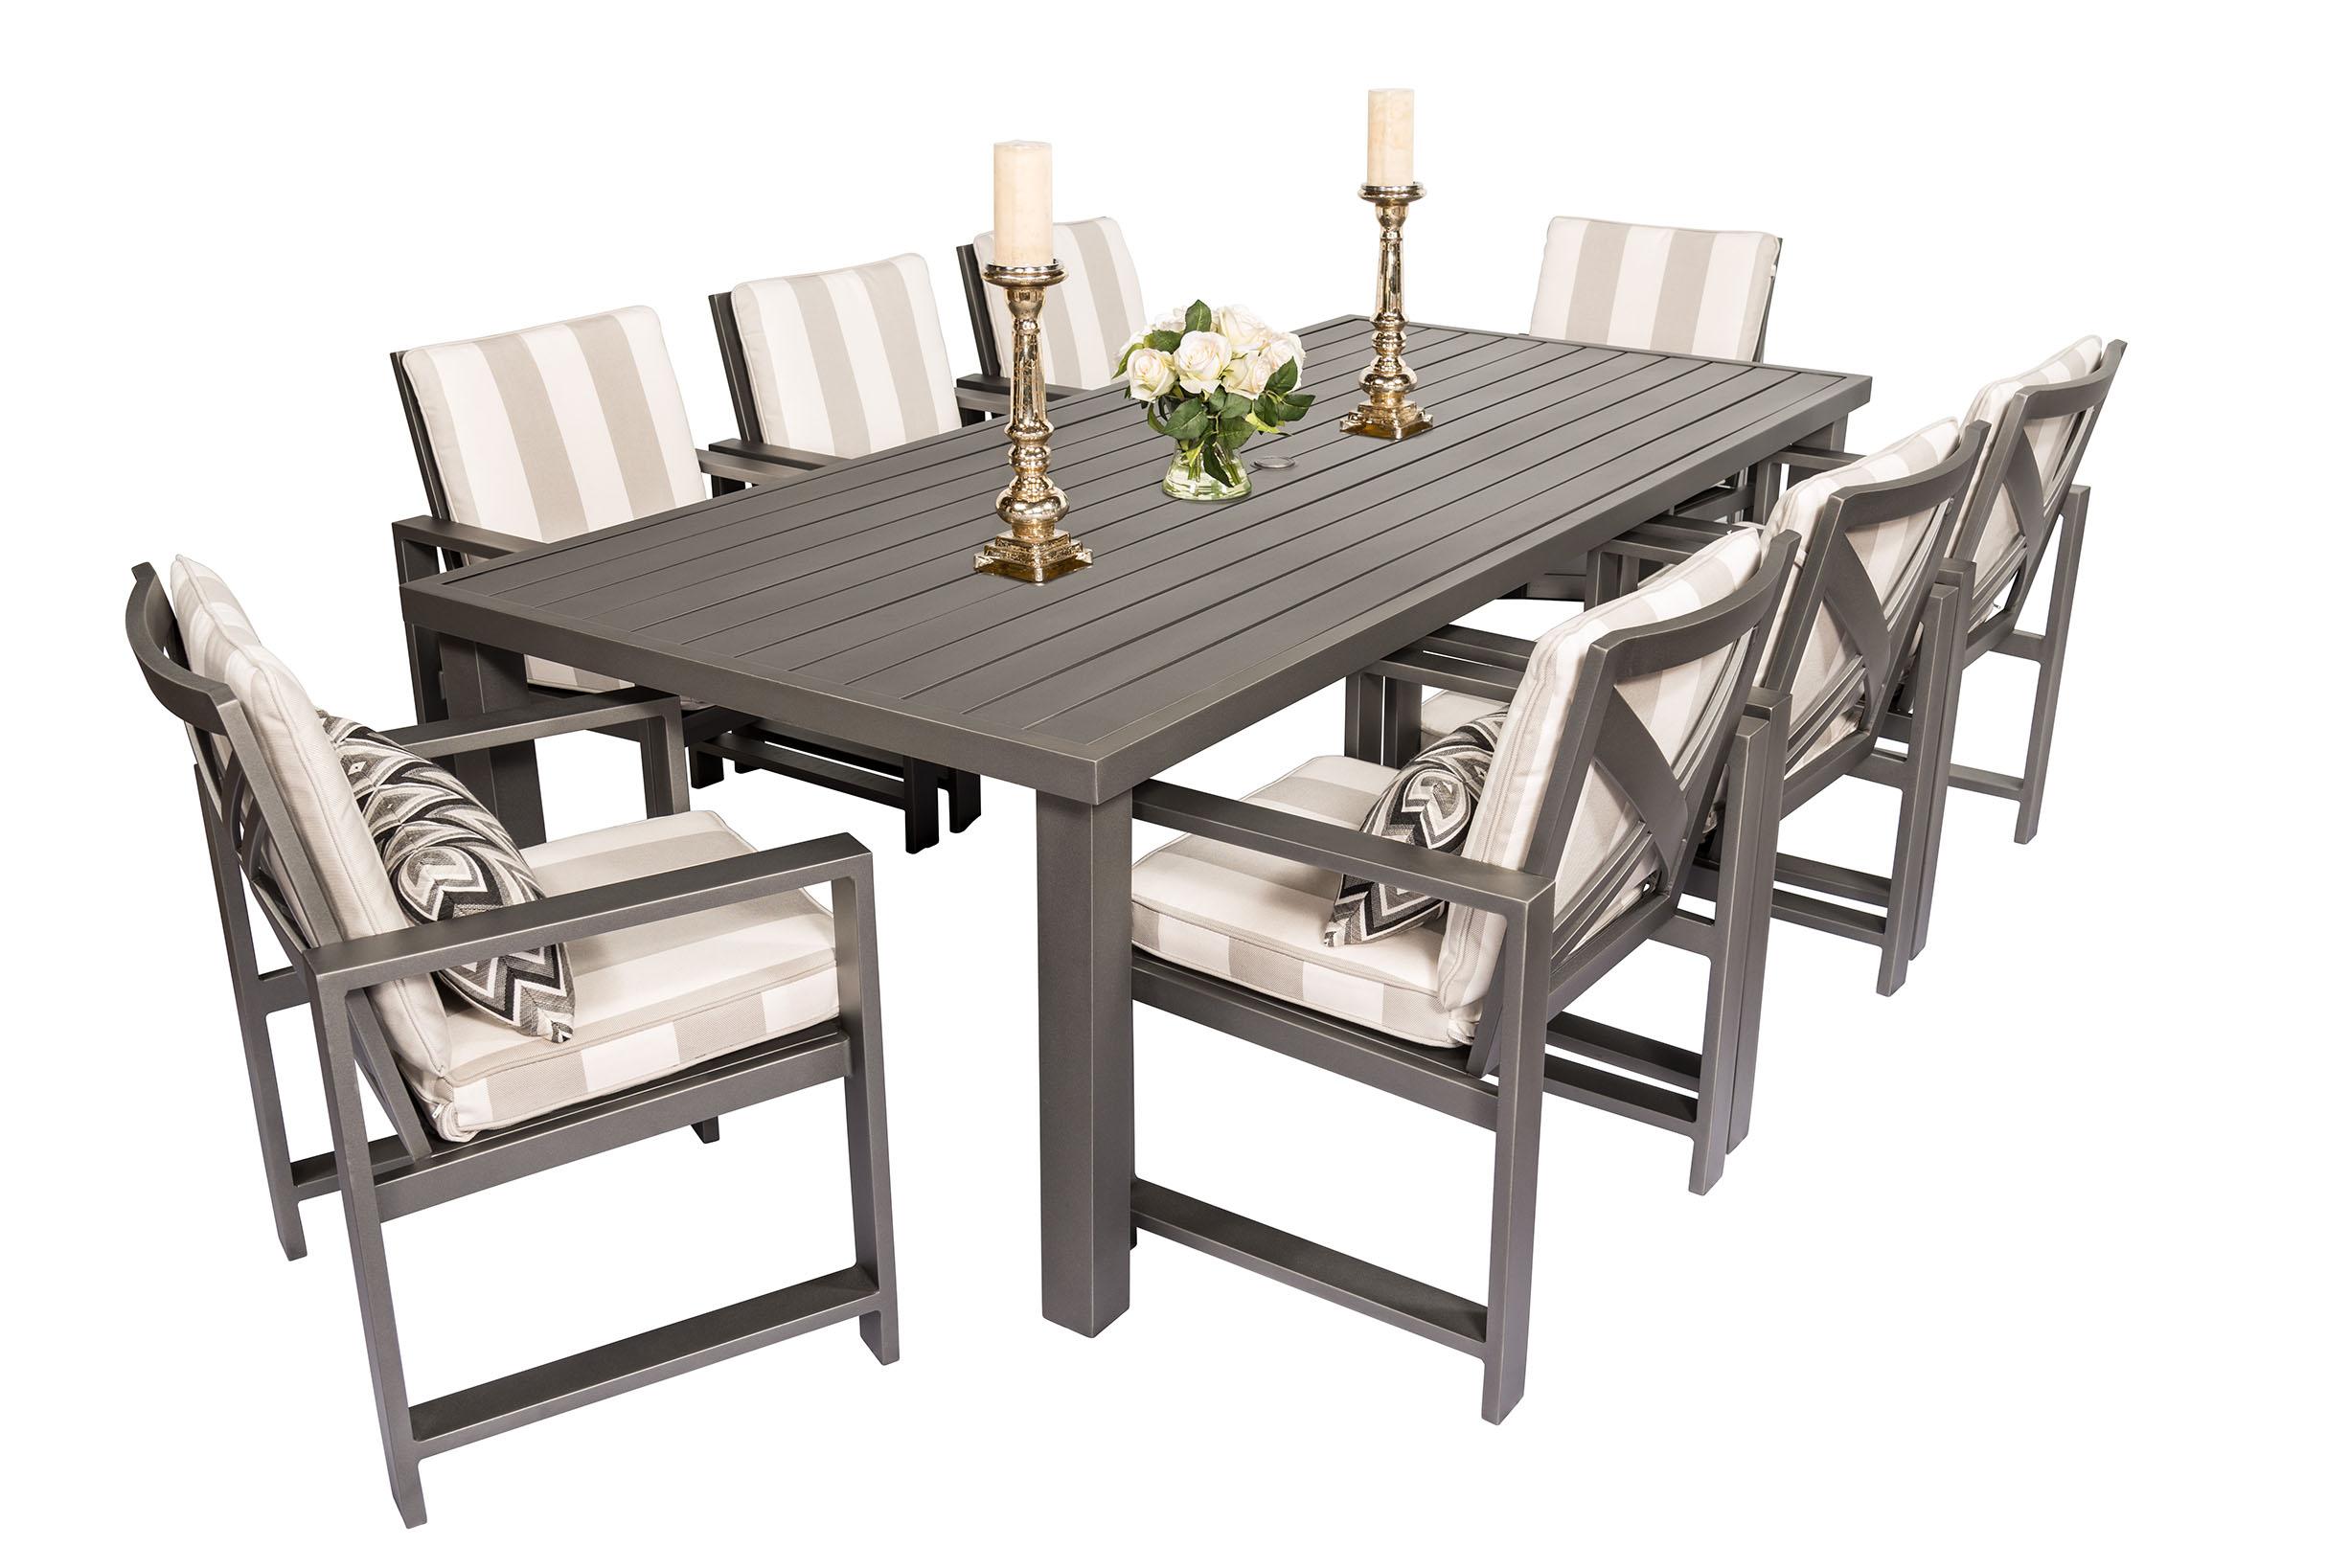 Contemporary Outdoor Dining Set Jolee RCTDT9644JL  JLDC-Set-9 in Natural, Gray Fabric